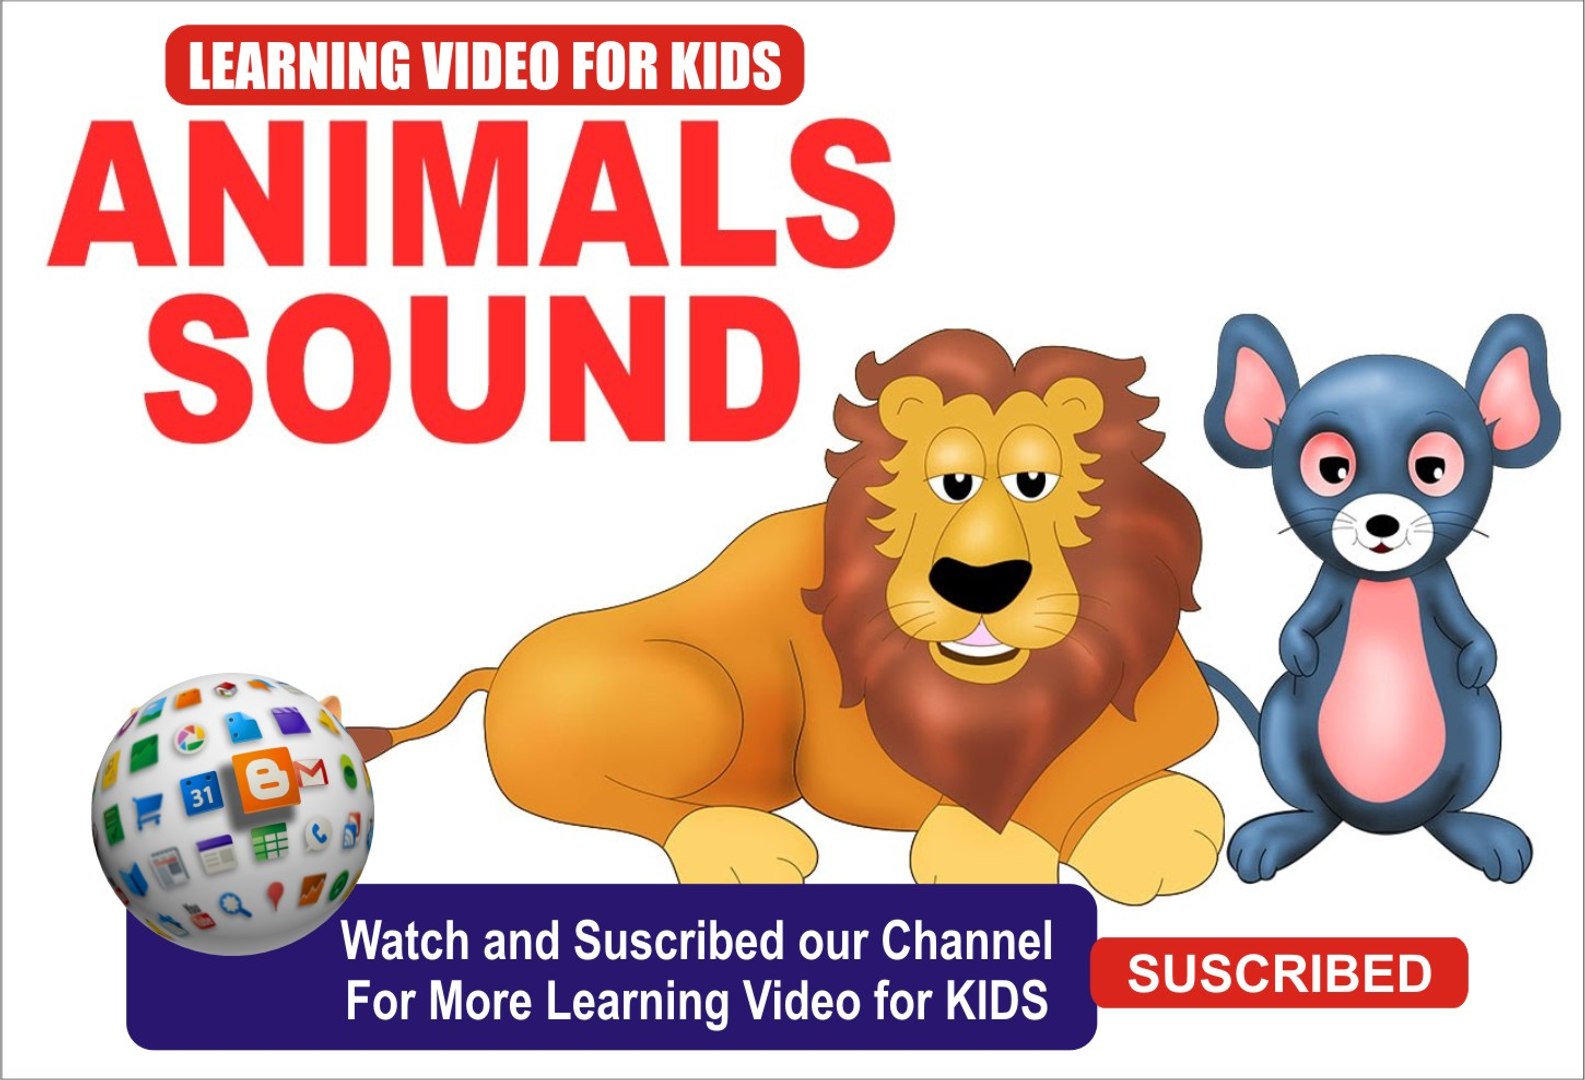 learn about wild animals animal sounds fun and educational videos for kids  - video Dailymotion